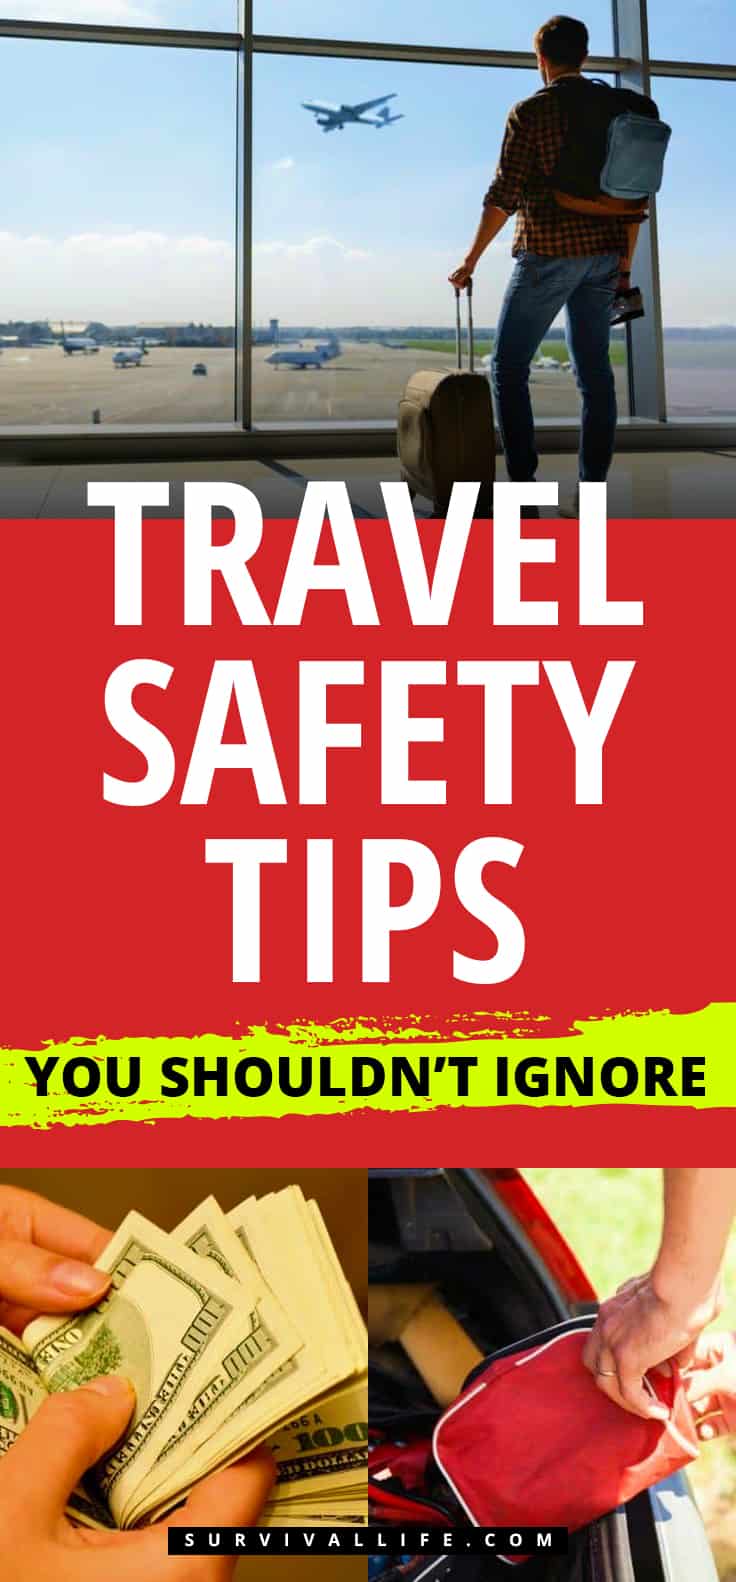  Travel Safety Tips You Shouldn't Ignore | http://survivallife.com/travel-safety-tips/